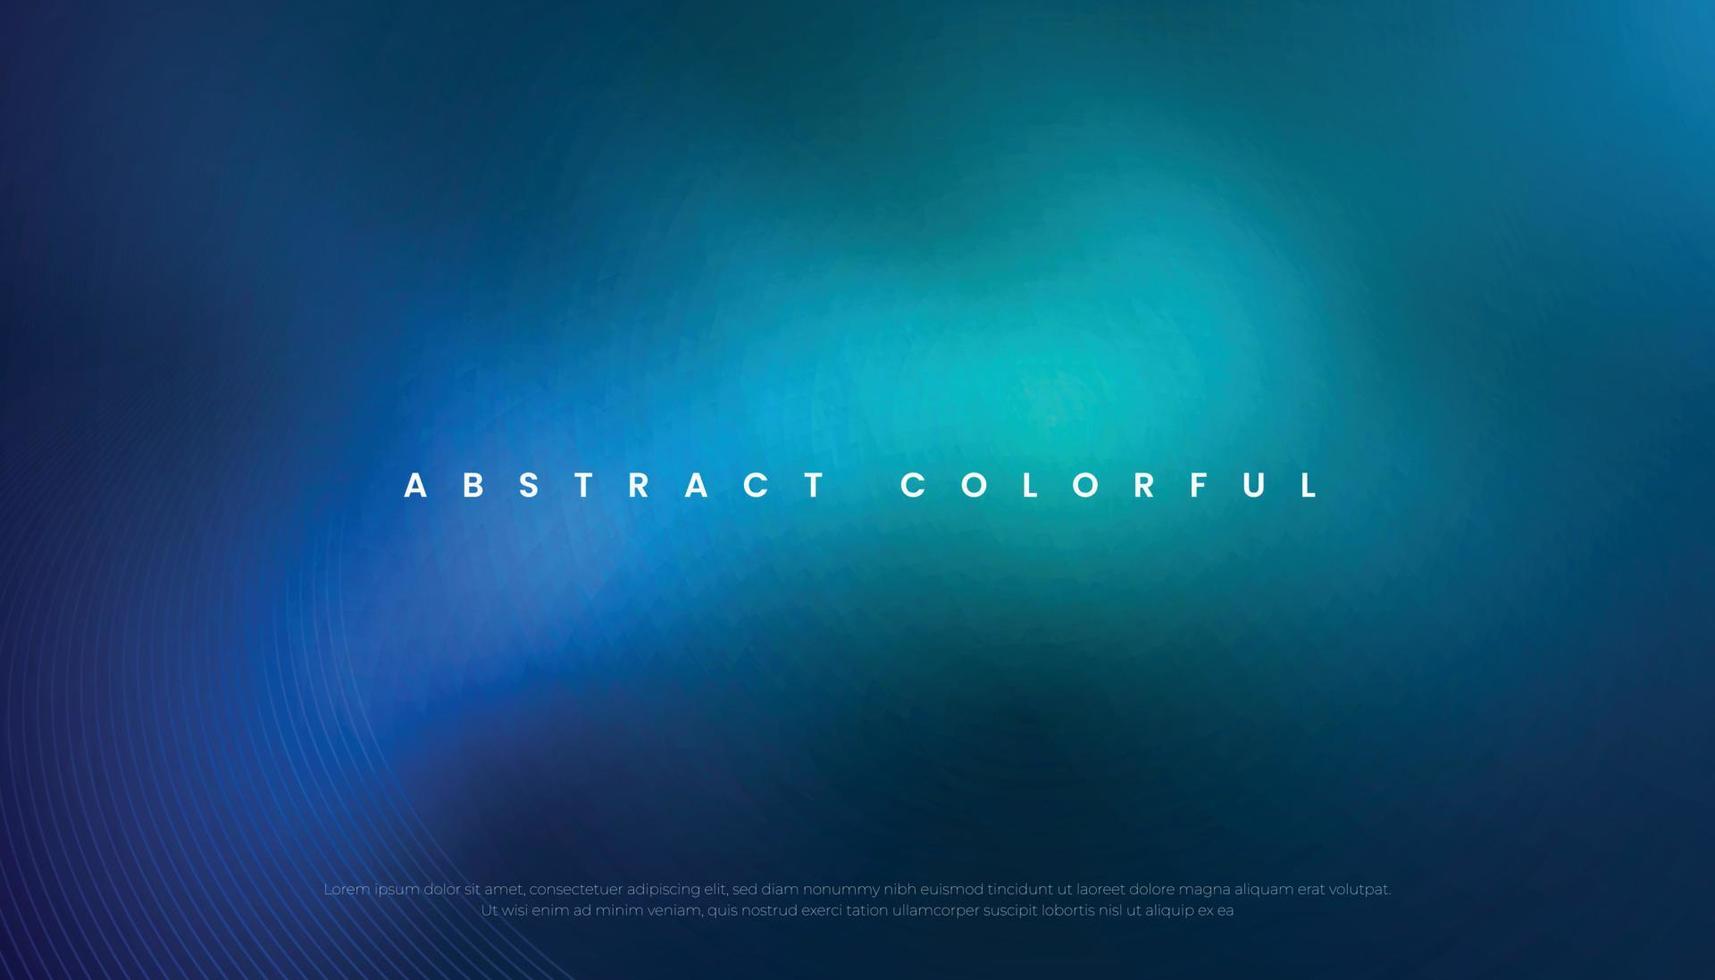 Abstract Colorful Gradient Blurred Background vector